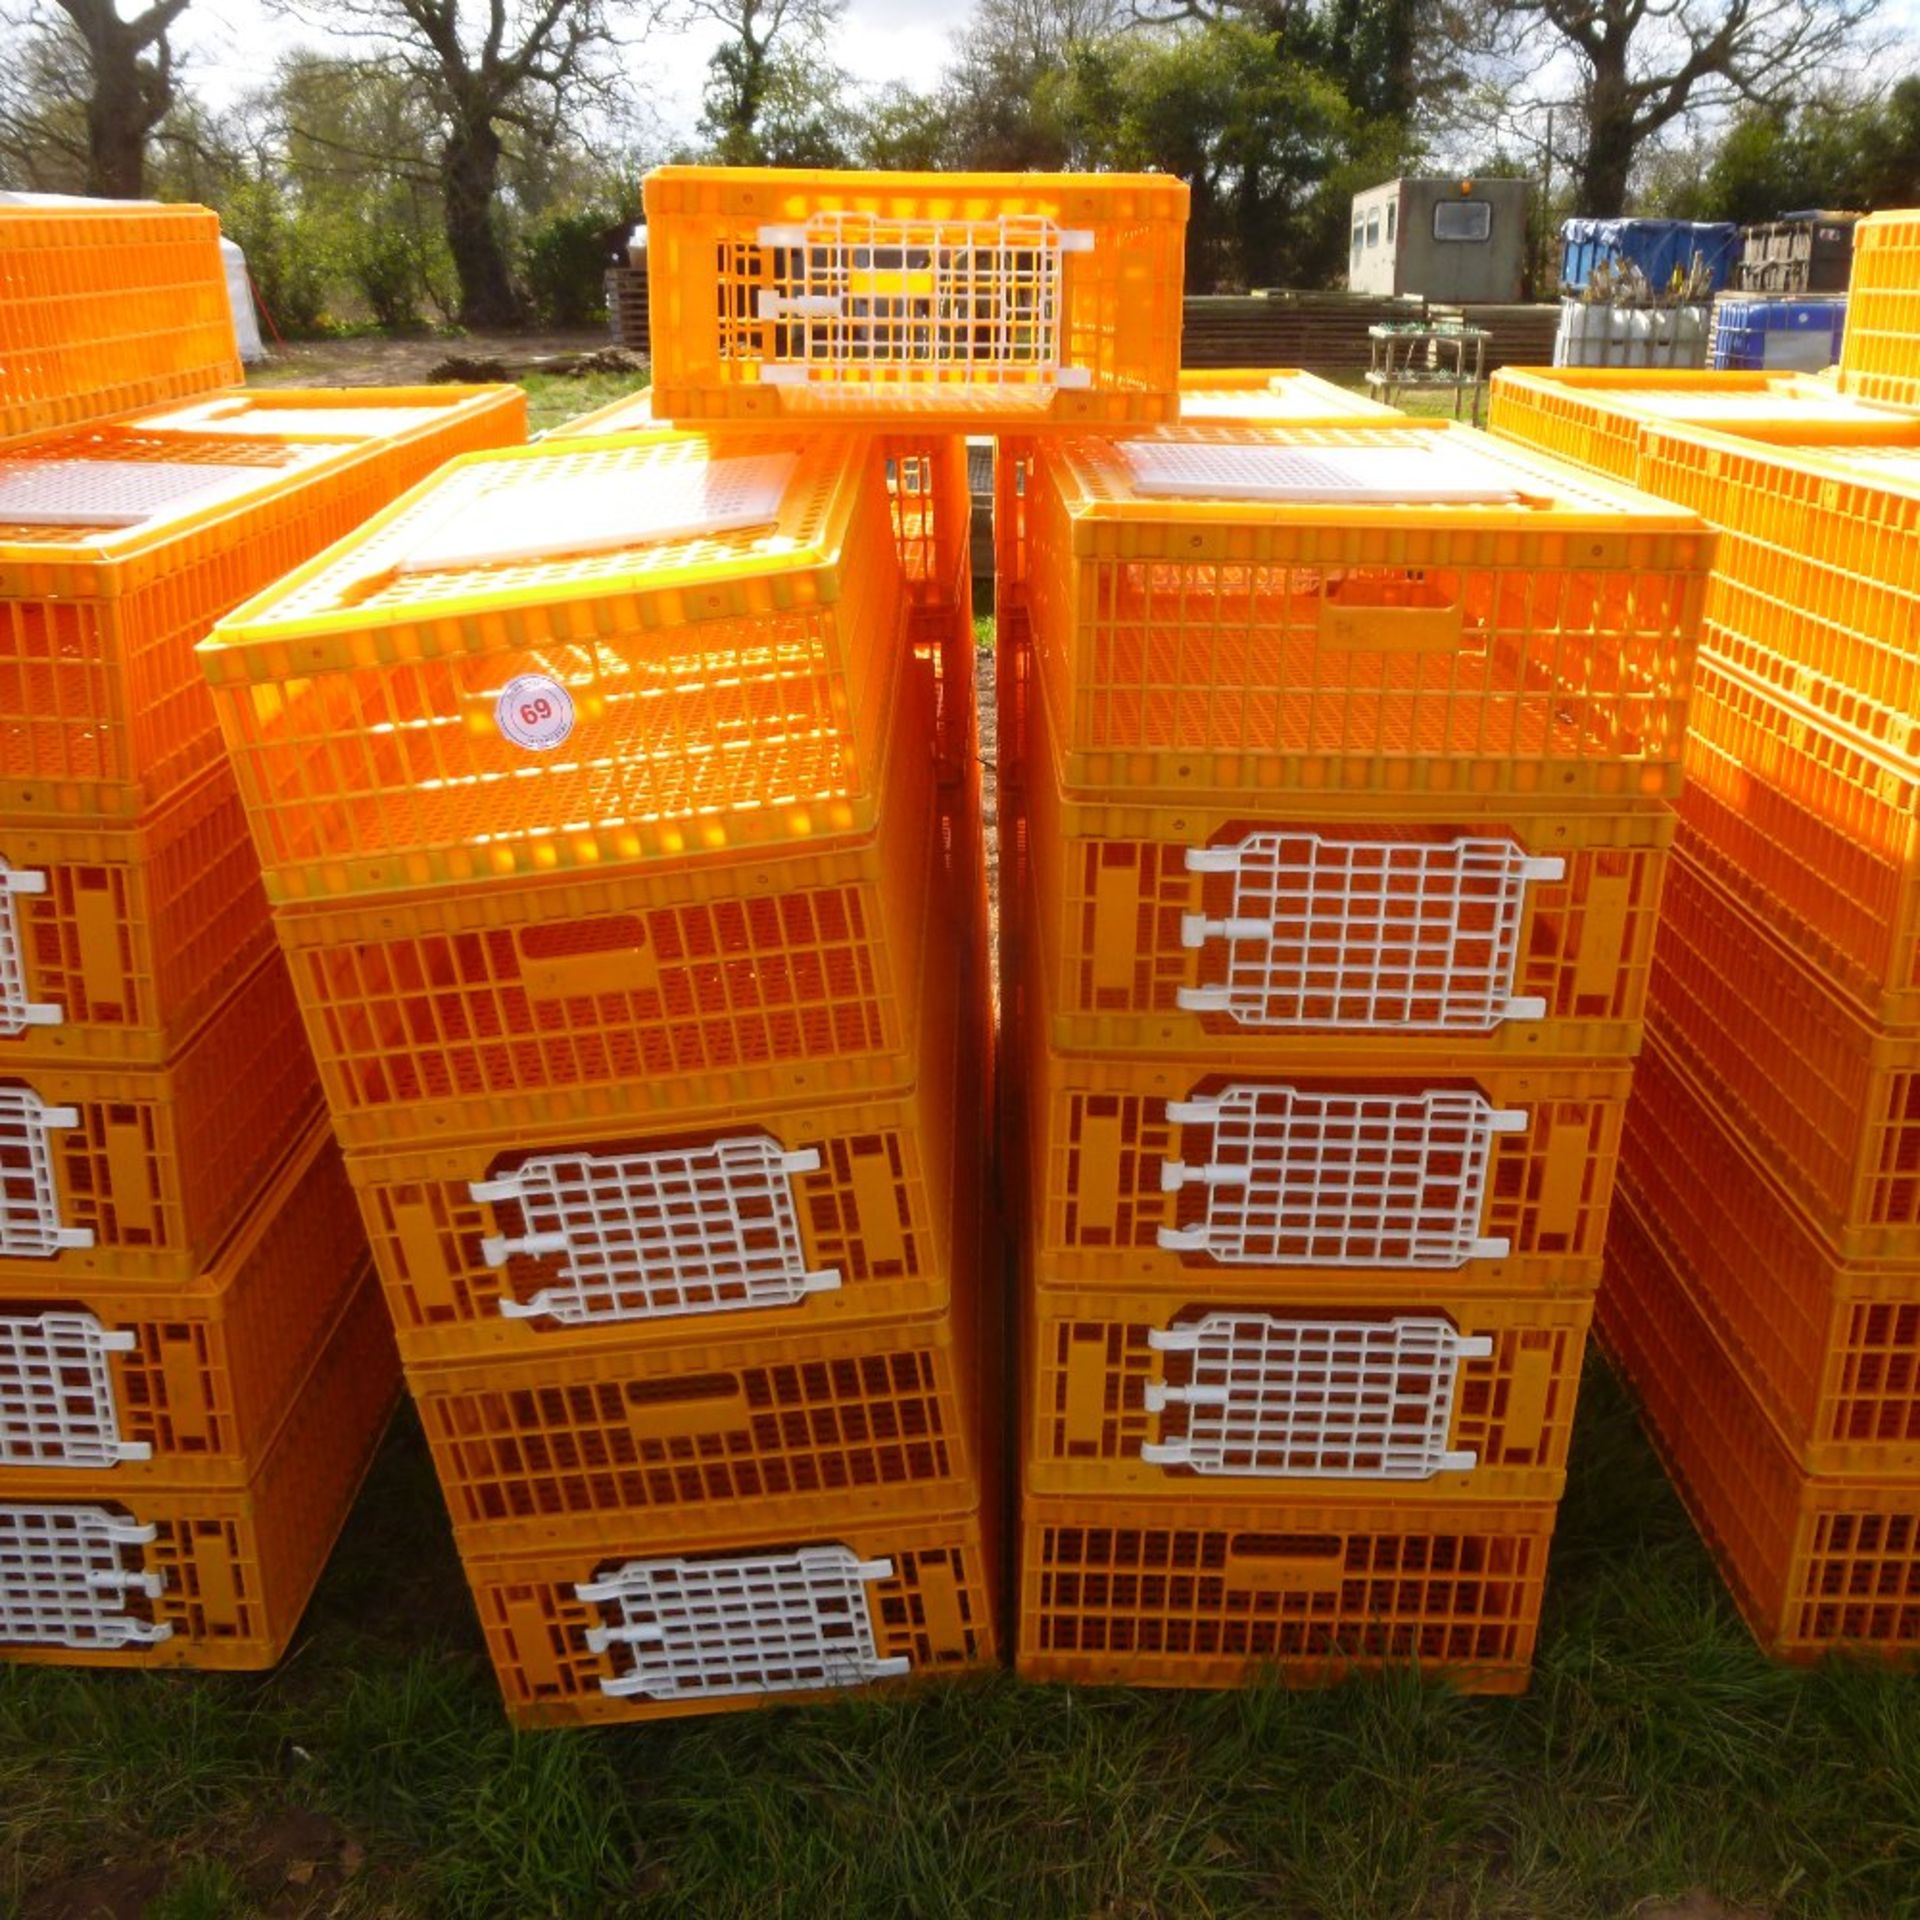 21 x D3 Giordano poultry crates